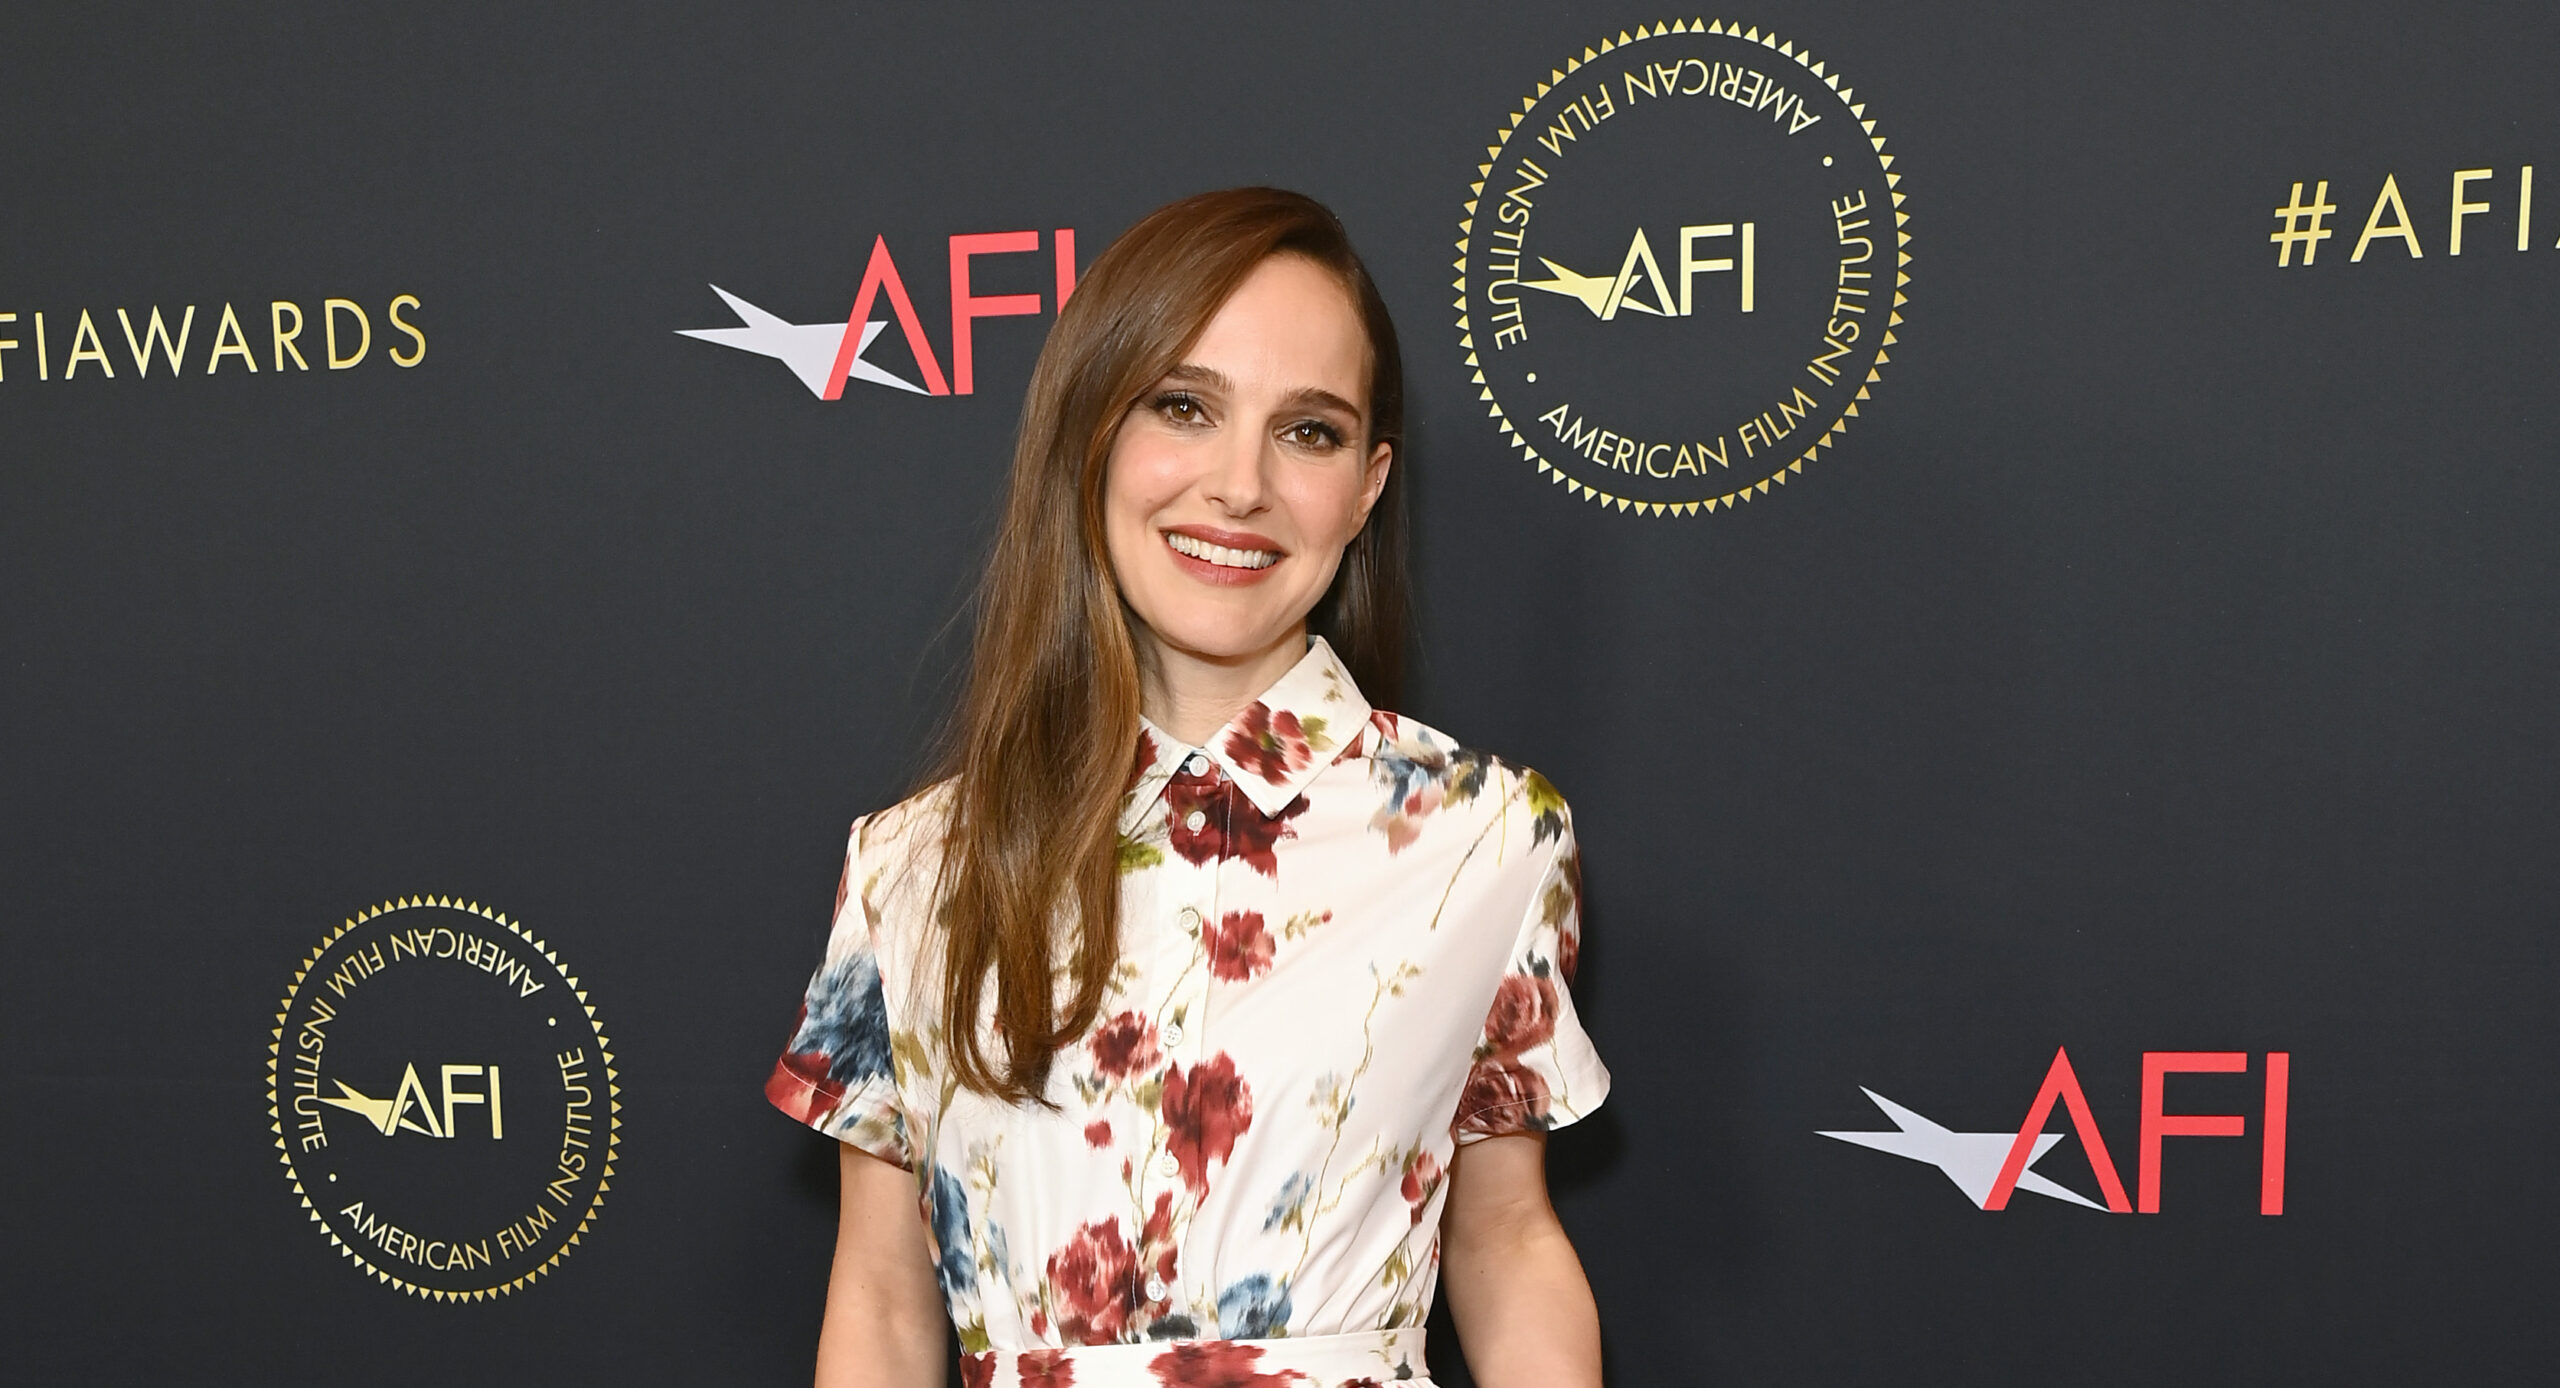 Natalie Portman in a floral Dior dress at the AFI Awards, her smile as captivating as her attire against the event's branded backdrop.